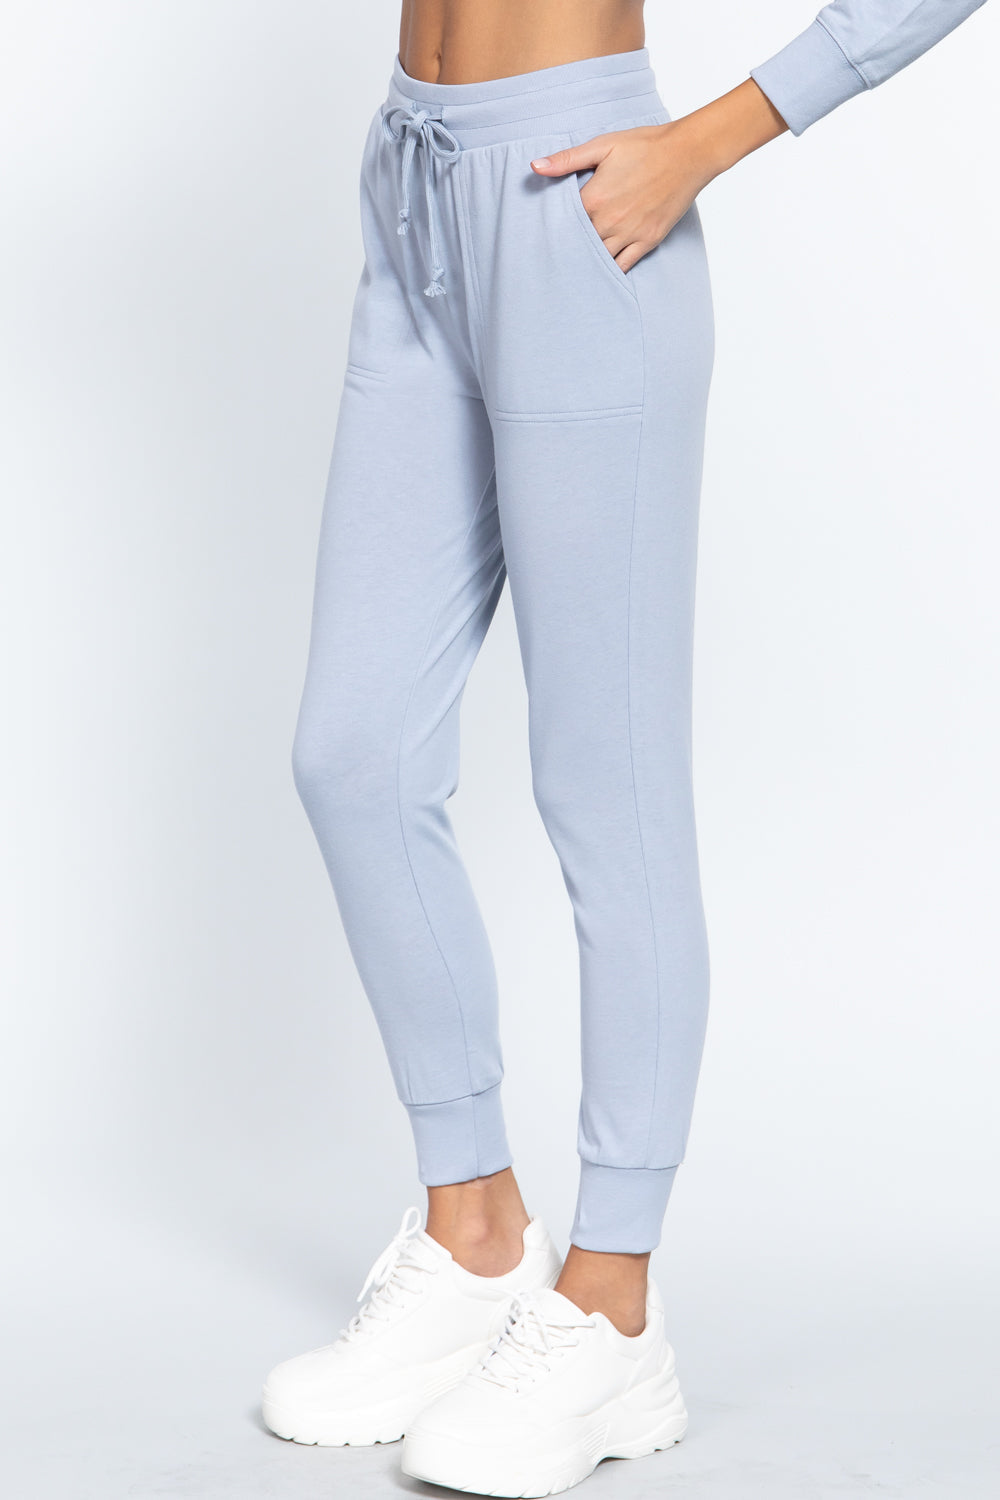 Waist Band Long Sweatpants With Pockets Smile Sparker